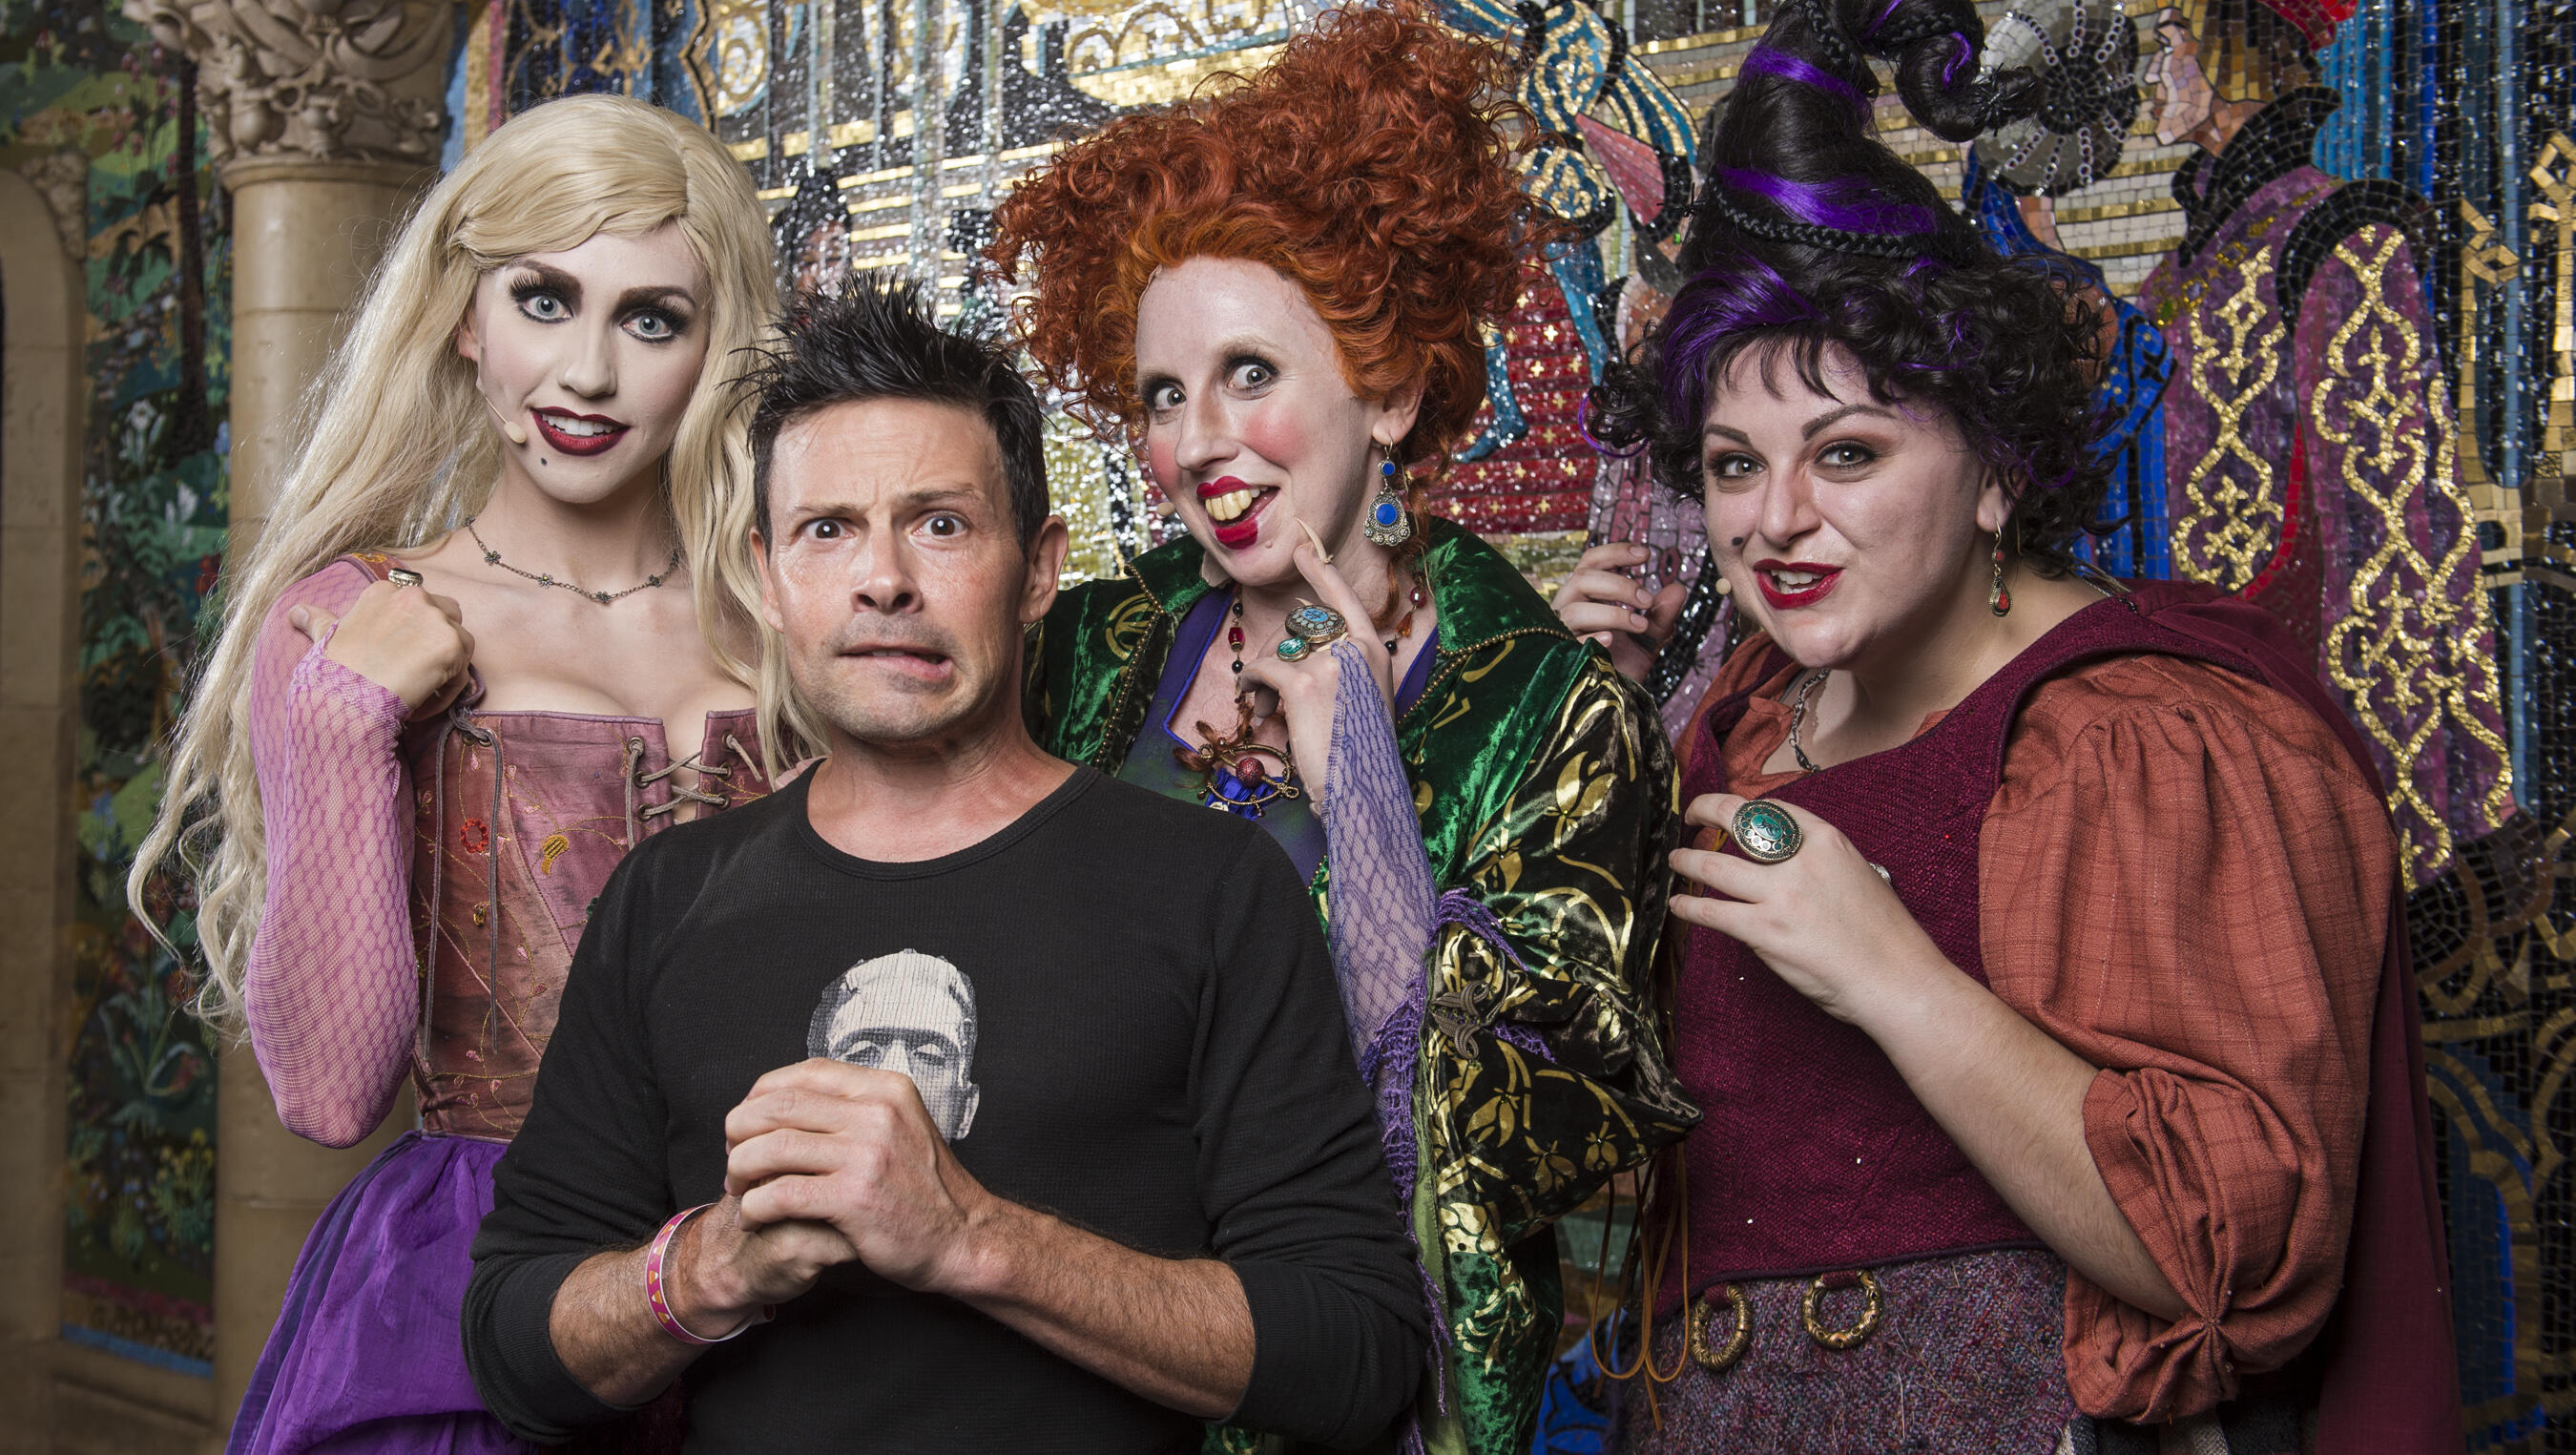 Watch the FIRST Trailer for the New "Hocus Pocus 2" Film 